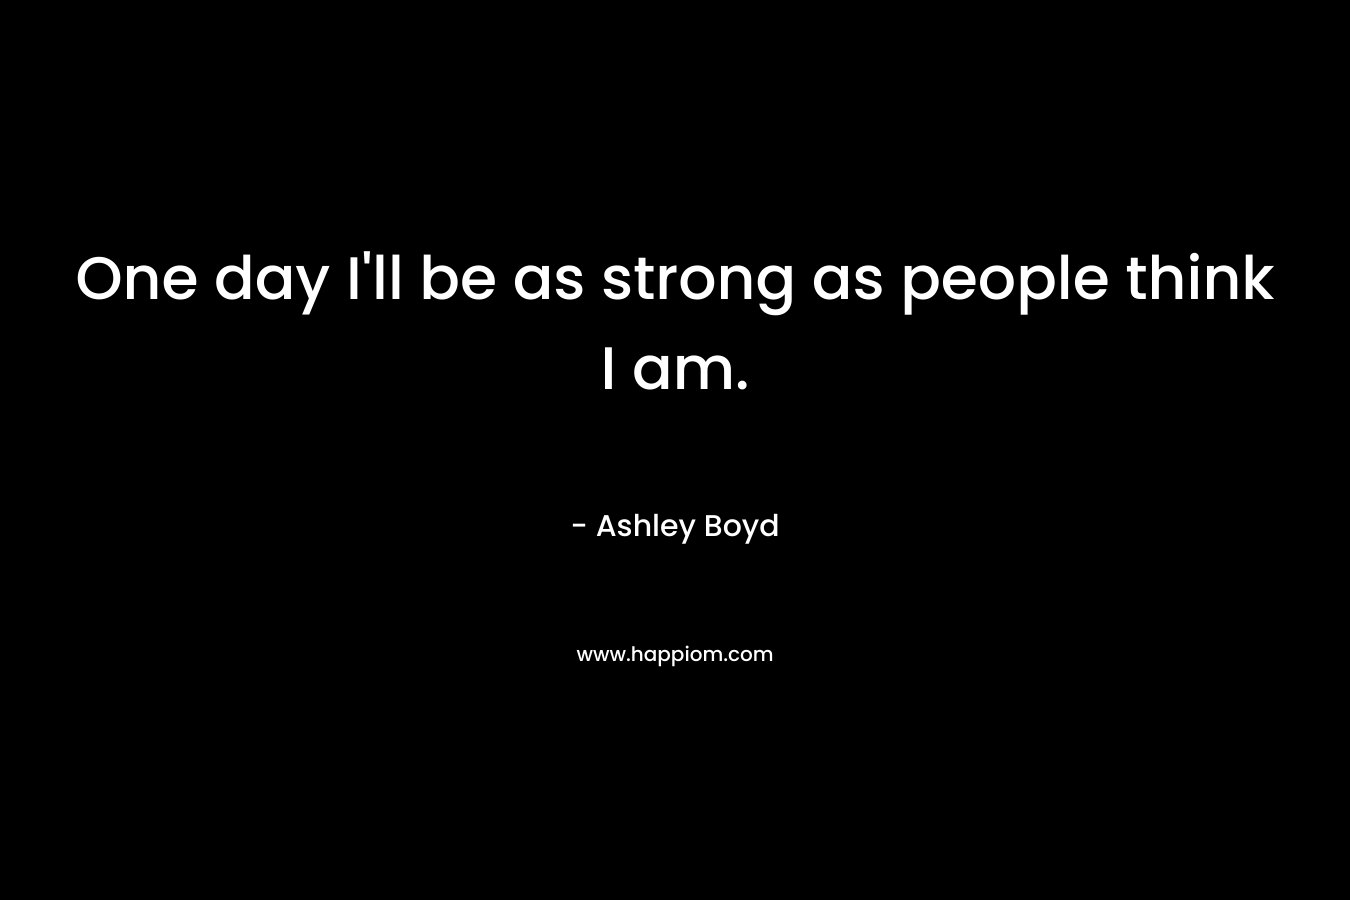 One day I'll be as strong as people think I am.